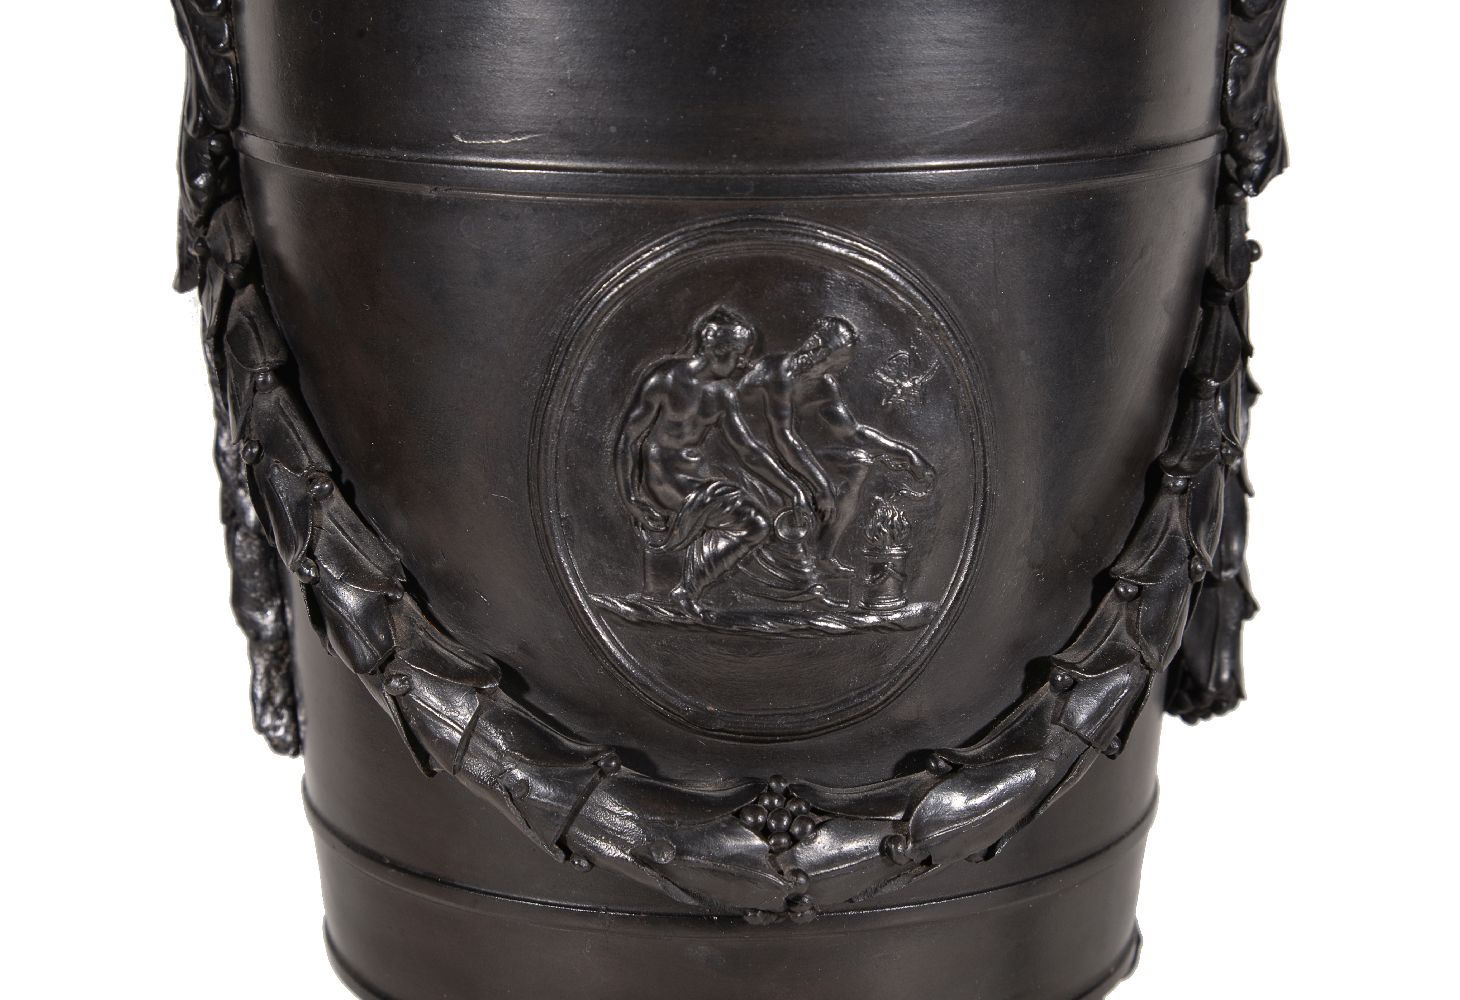 A rare S. Greenwood of Fenton black basalt classical urn, circa 1775, the shoulder with an oakleaf - Image 2 of 5